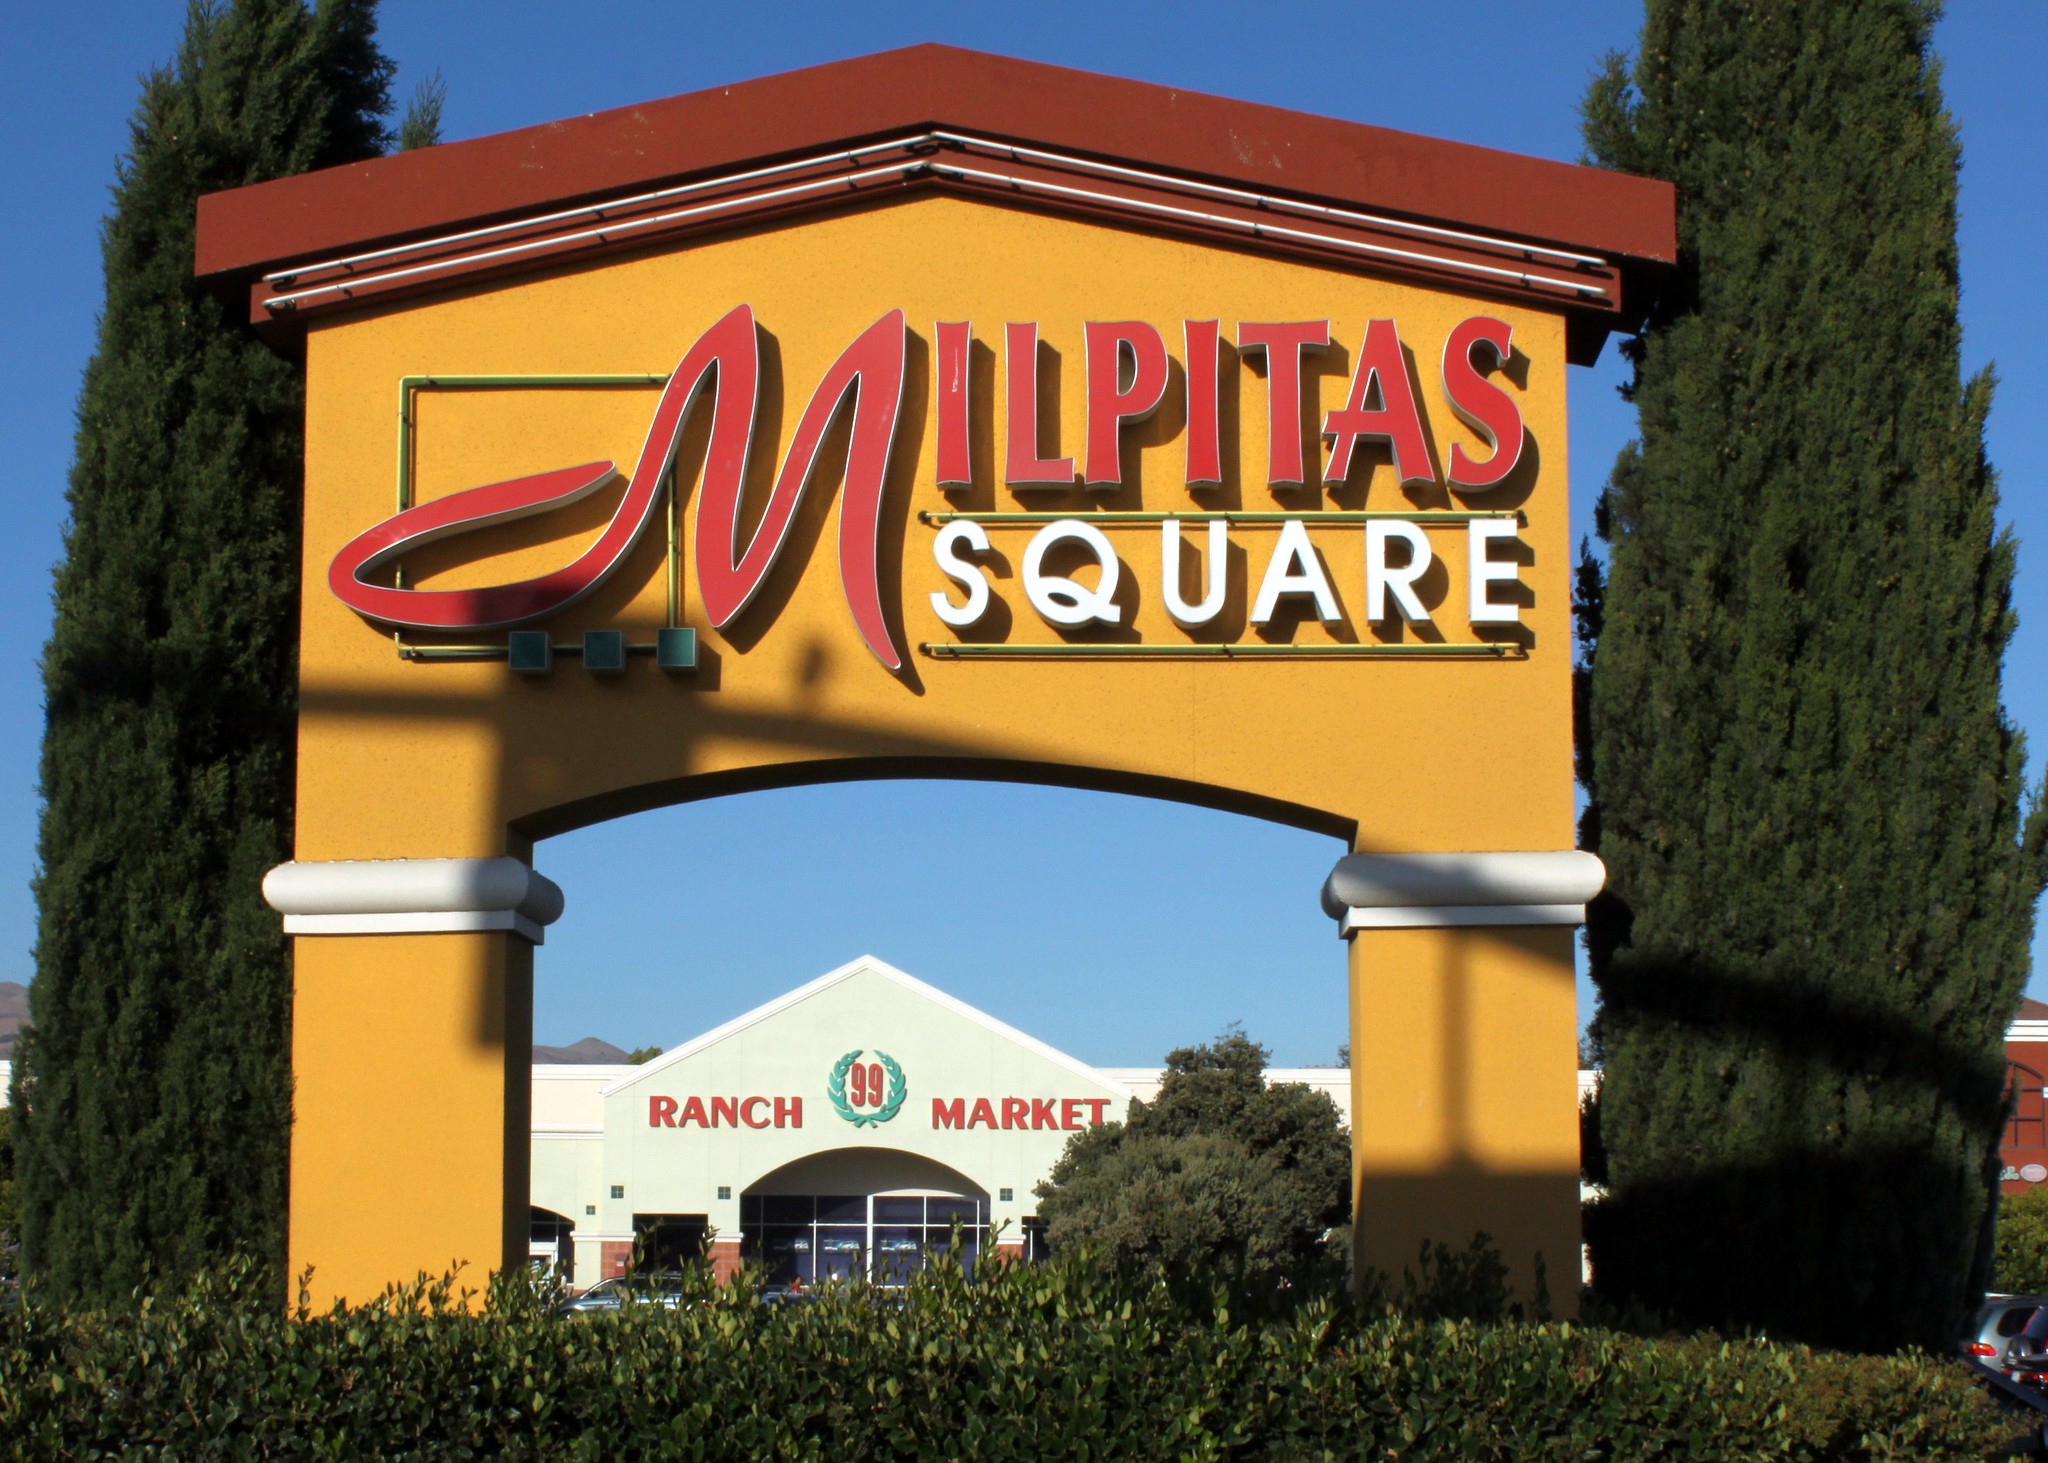 The sign for the Milpitas Square mall